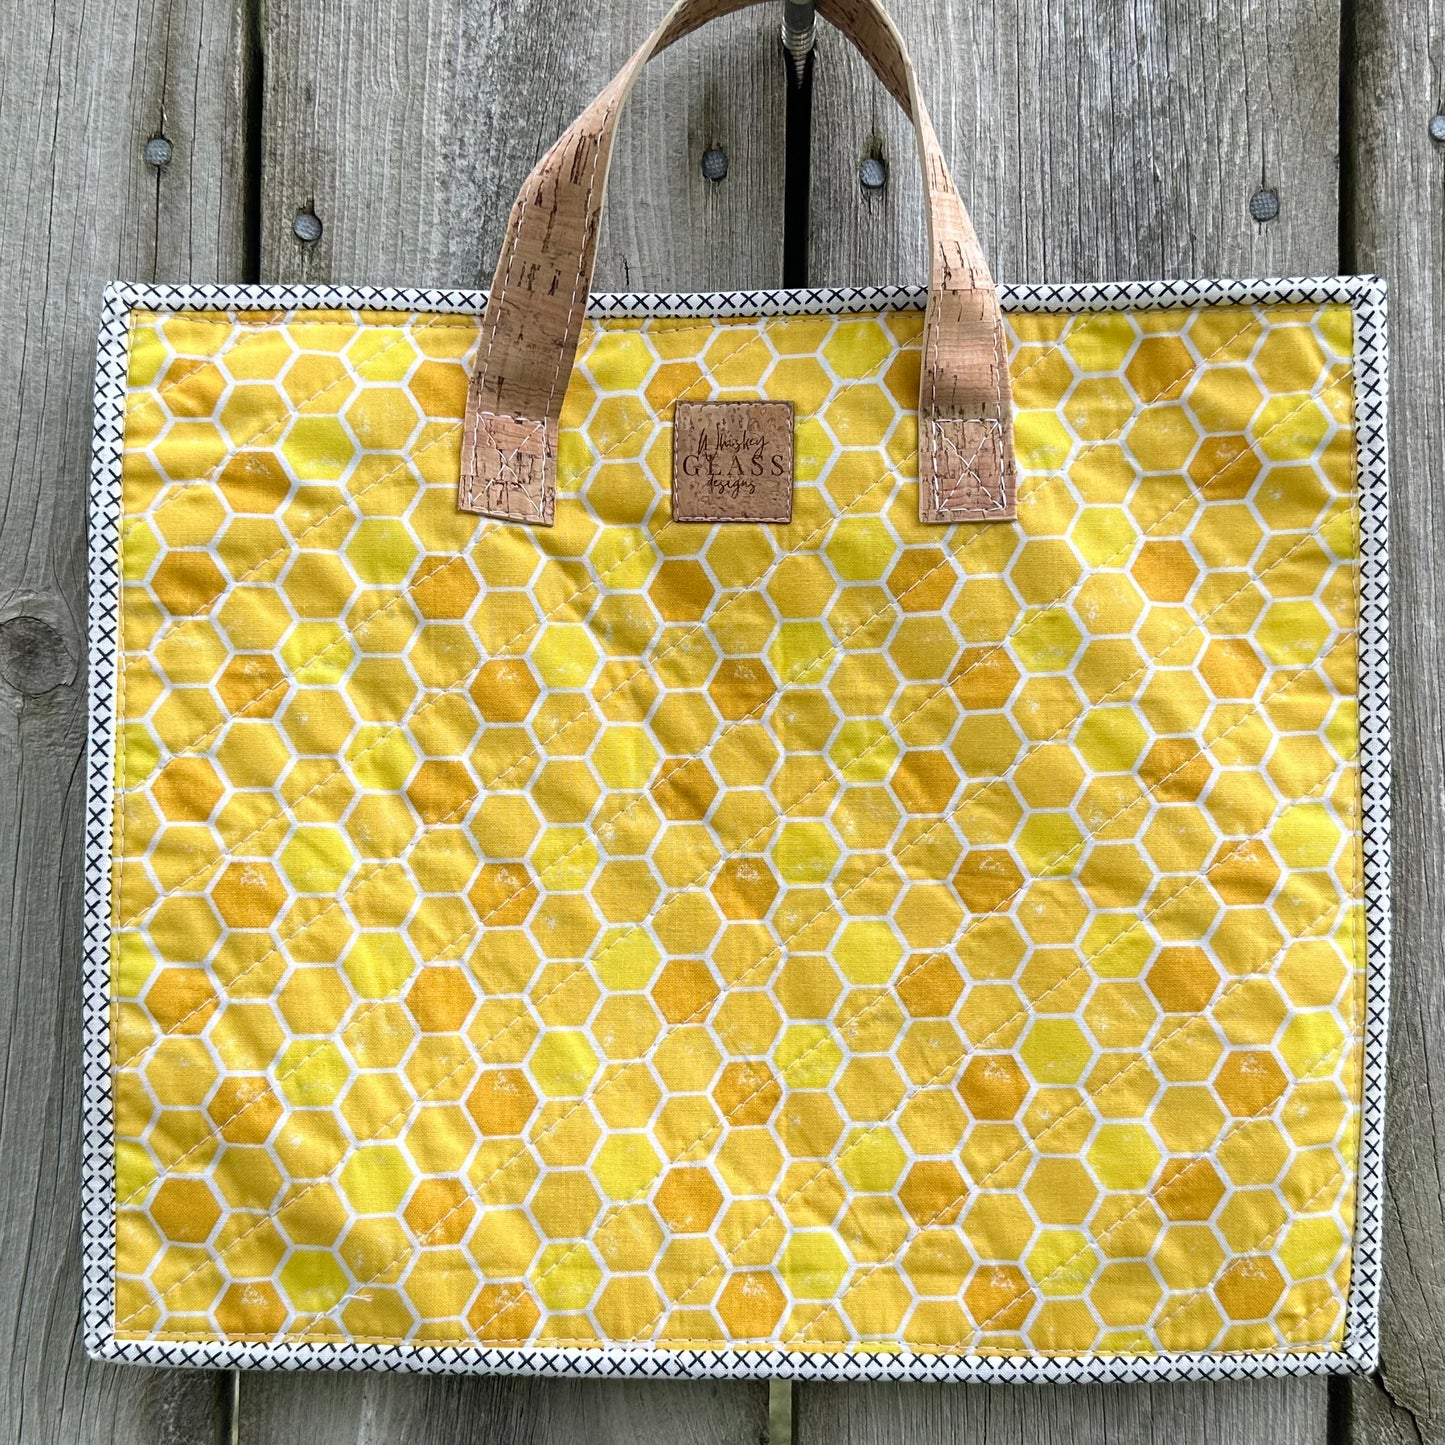 Medium Vinyl Front Buzzy Bees Project Bag by Whiskey Glass Designs